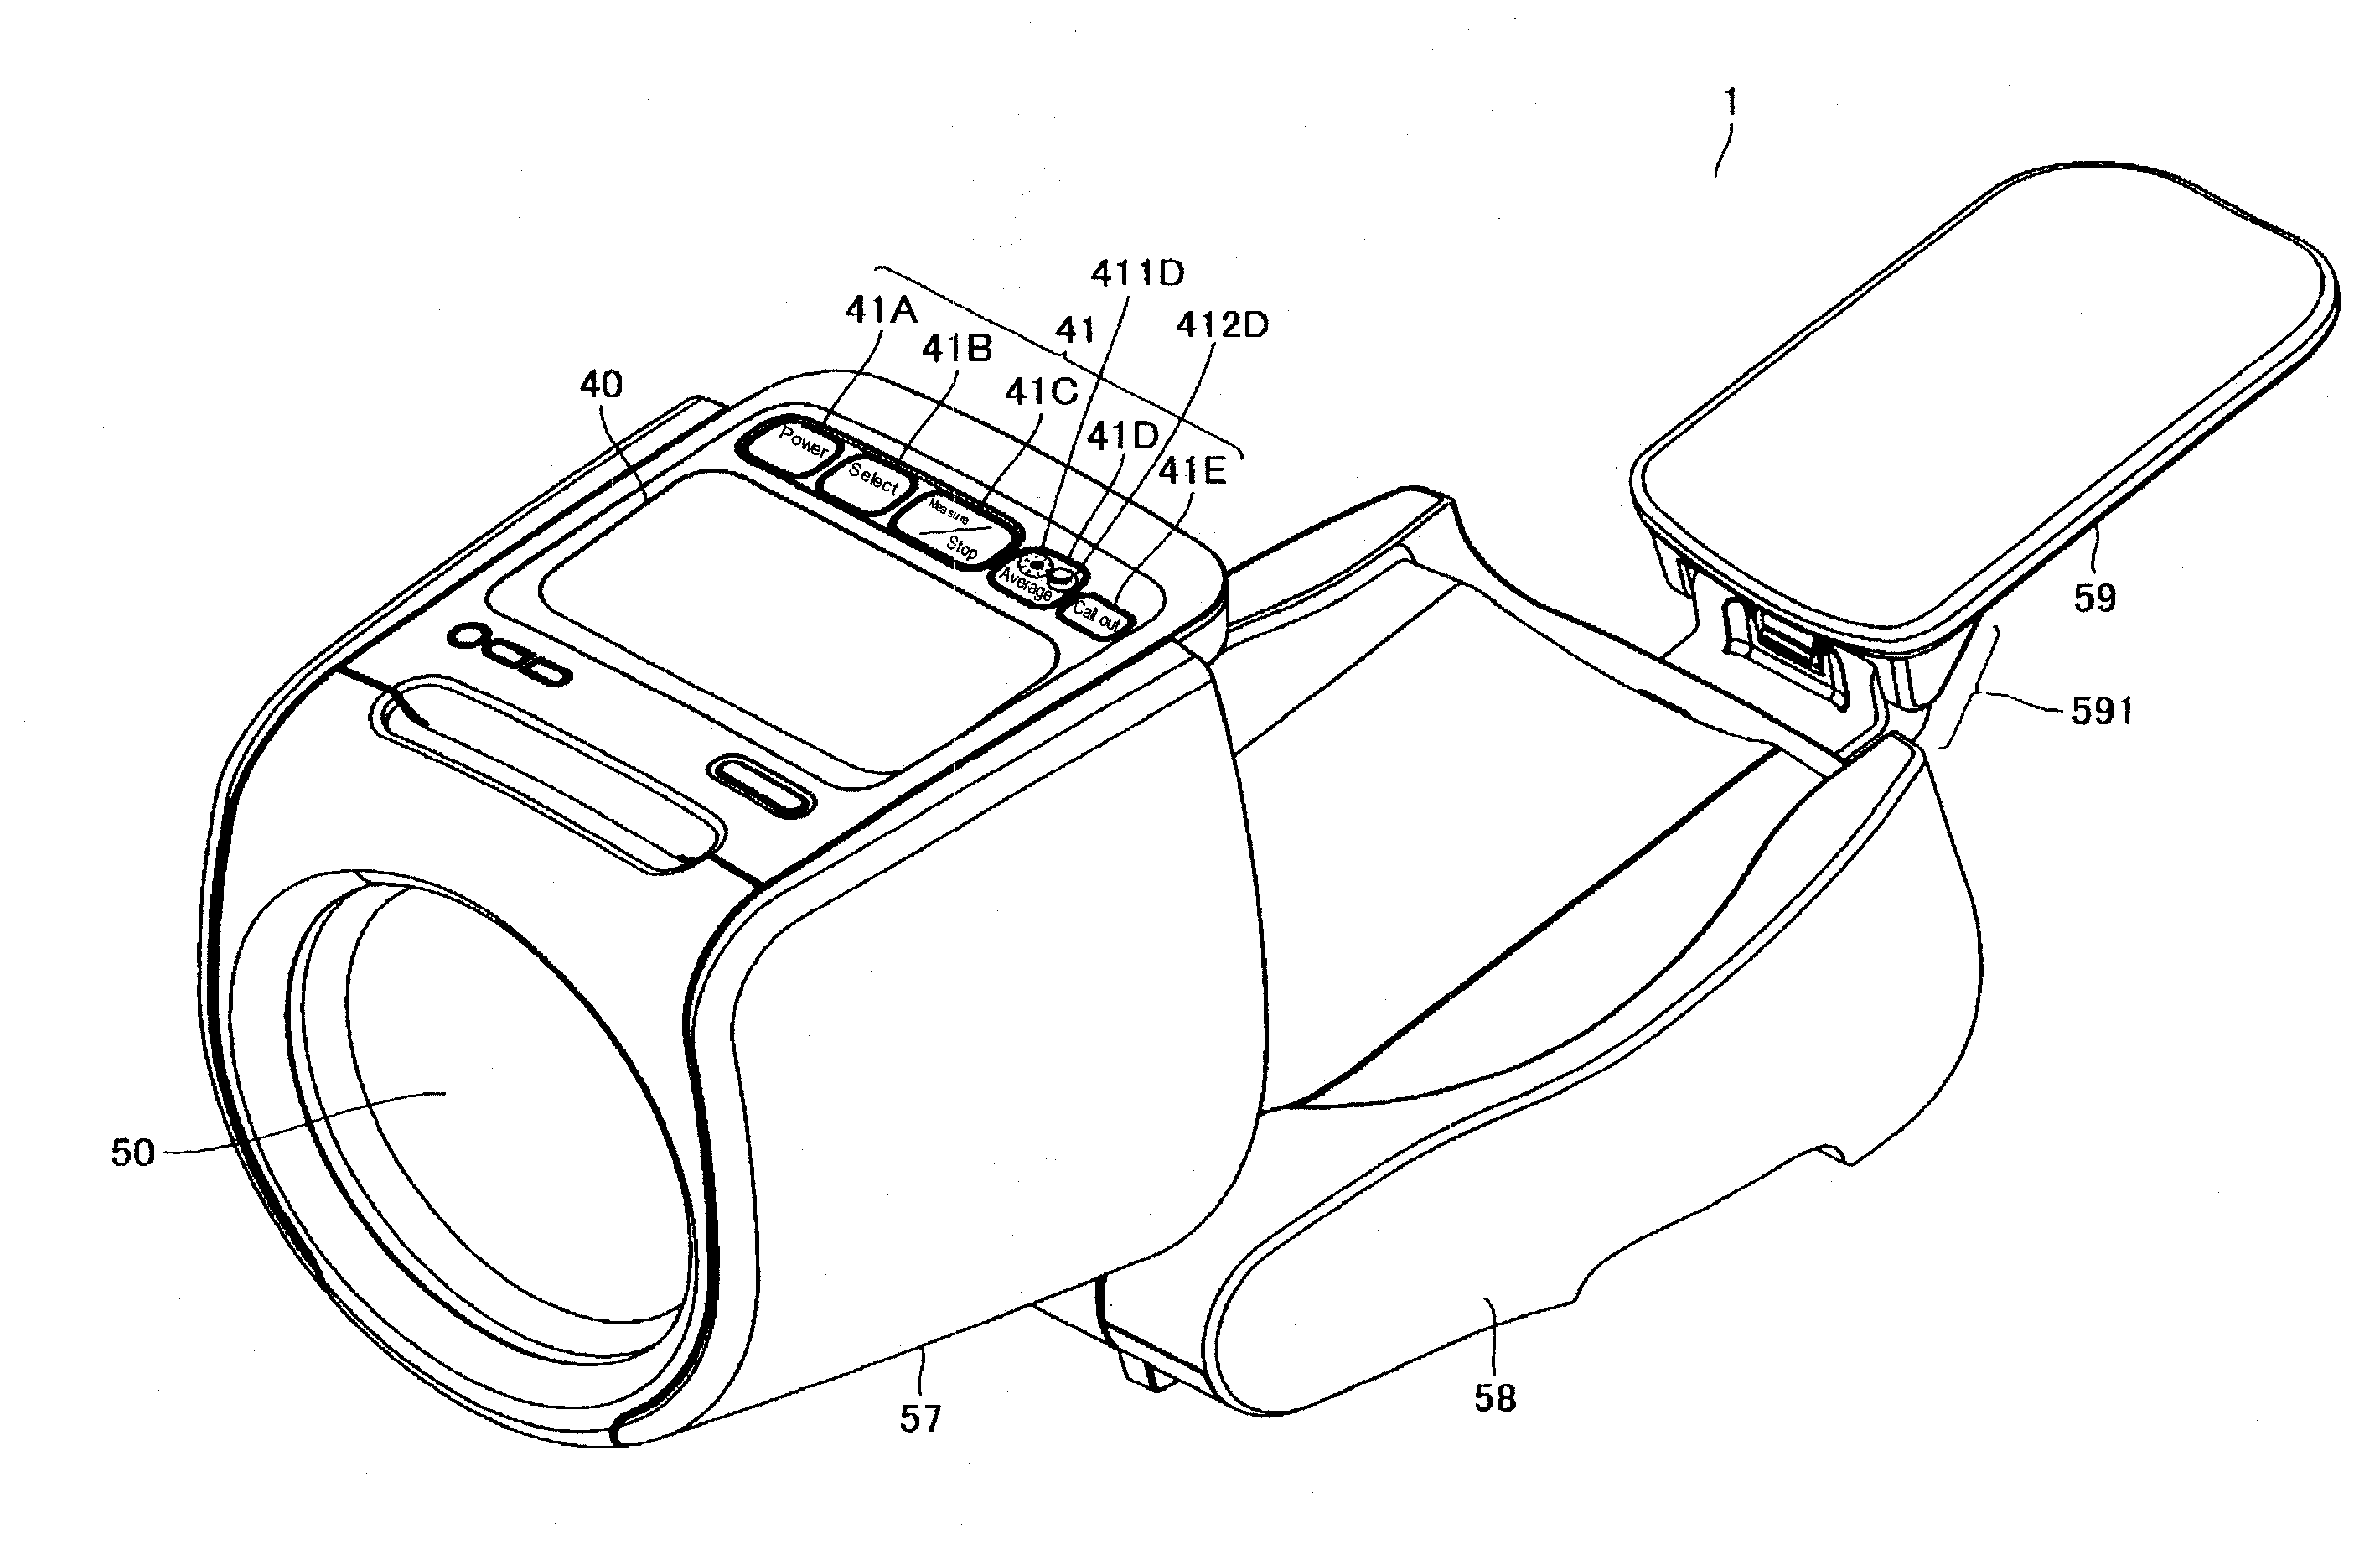 Blood pressure measuring device with improved display